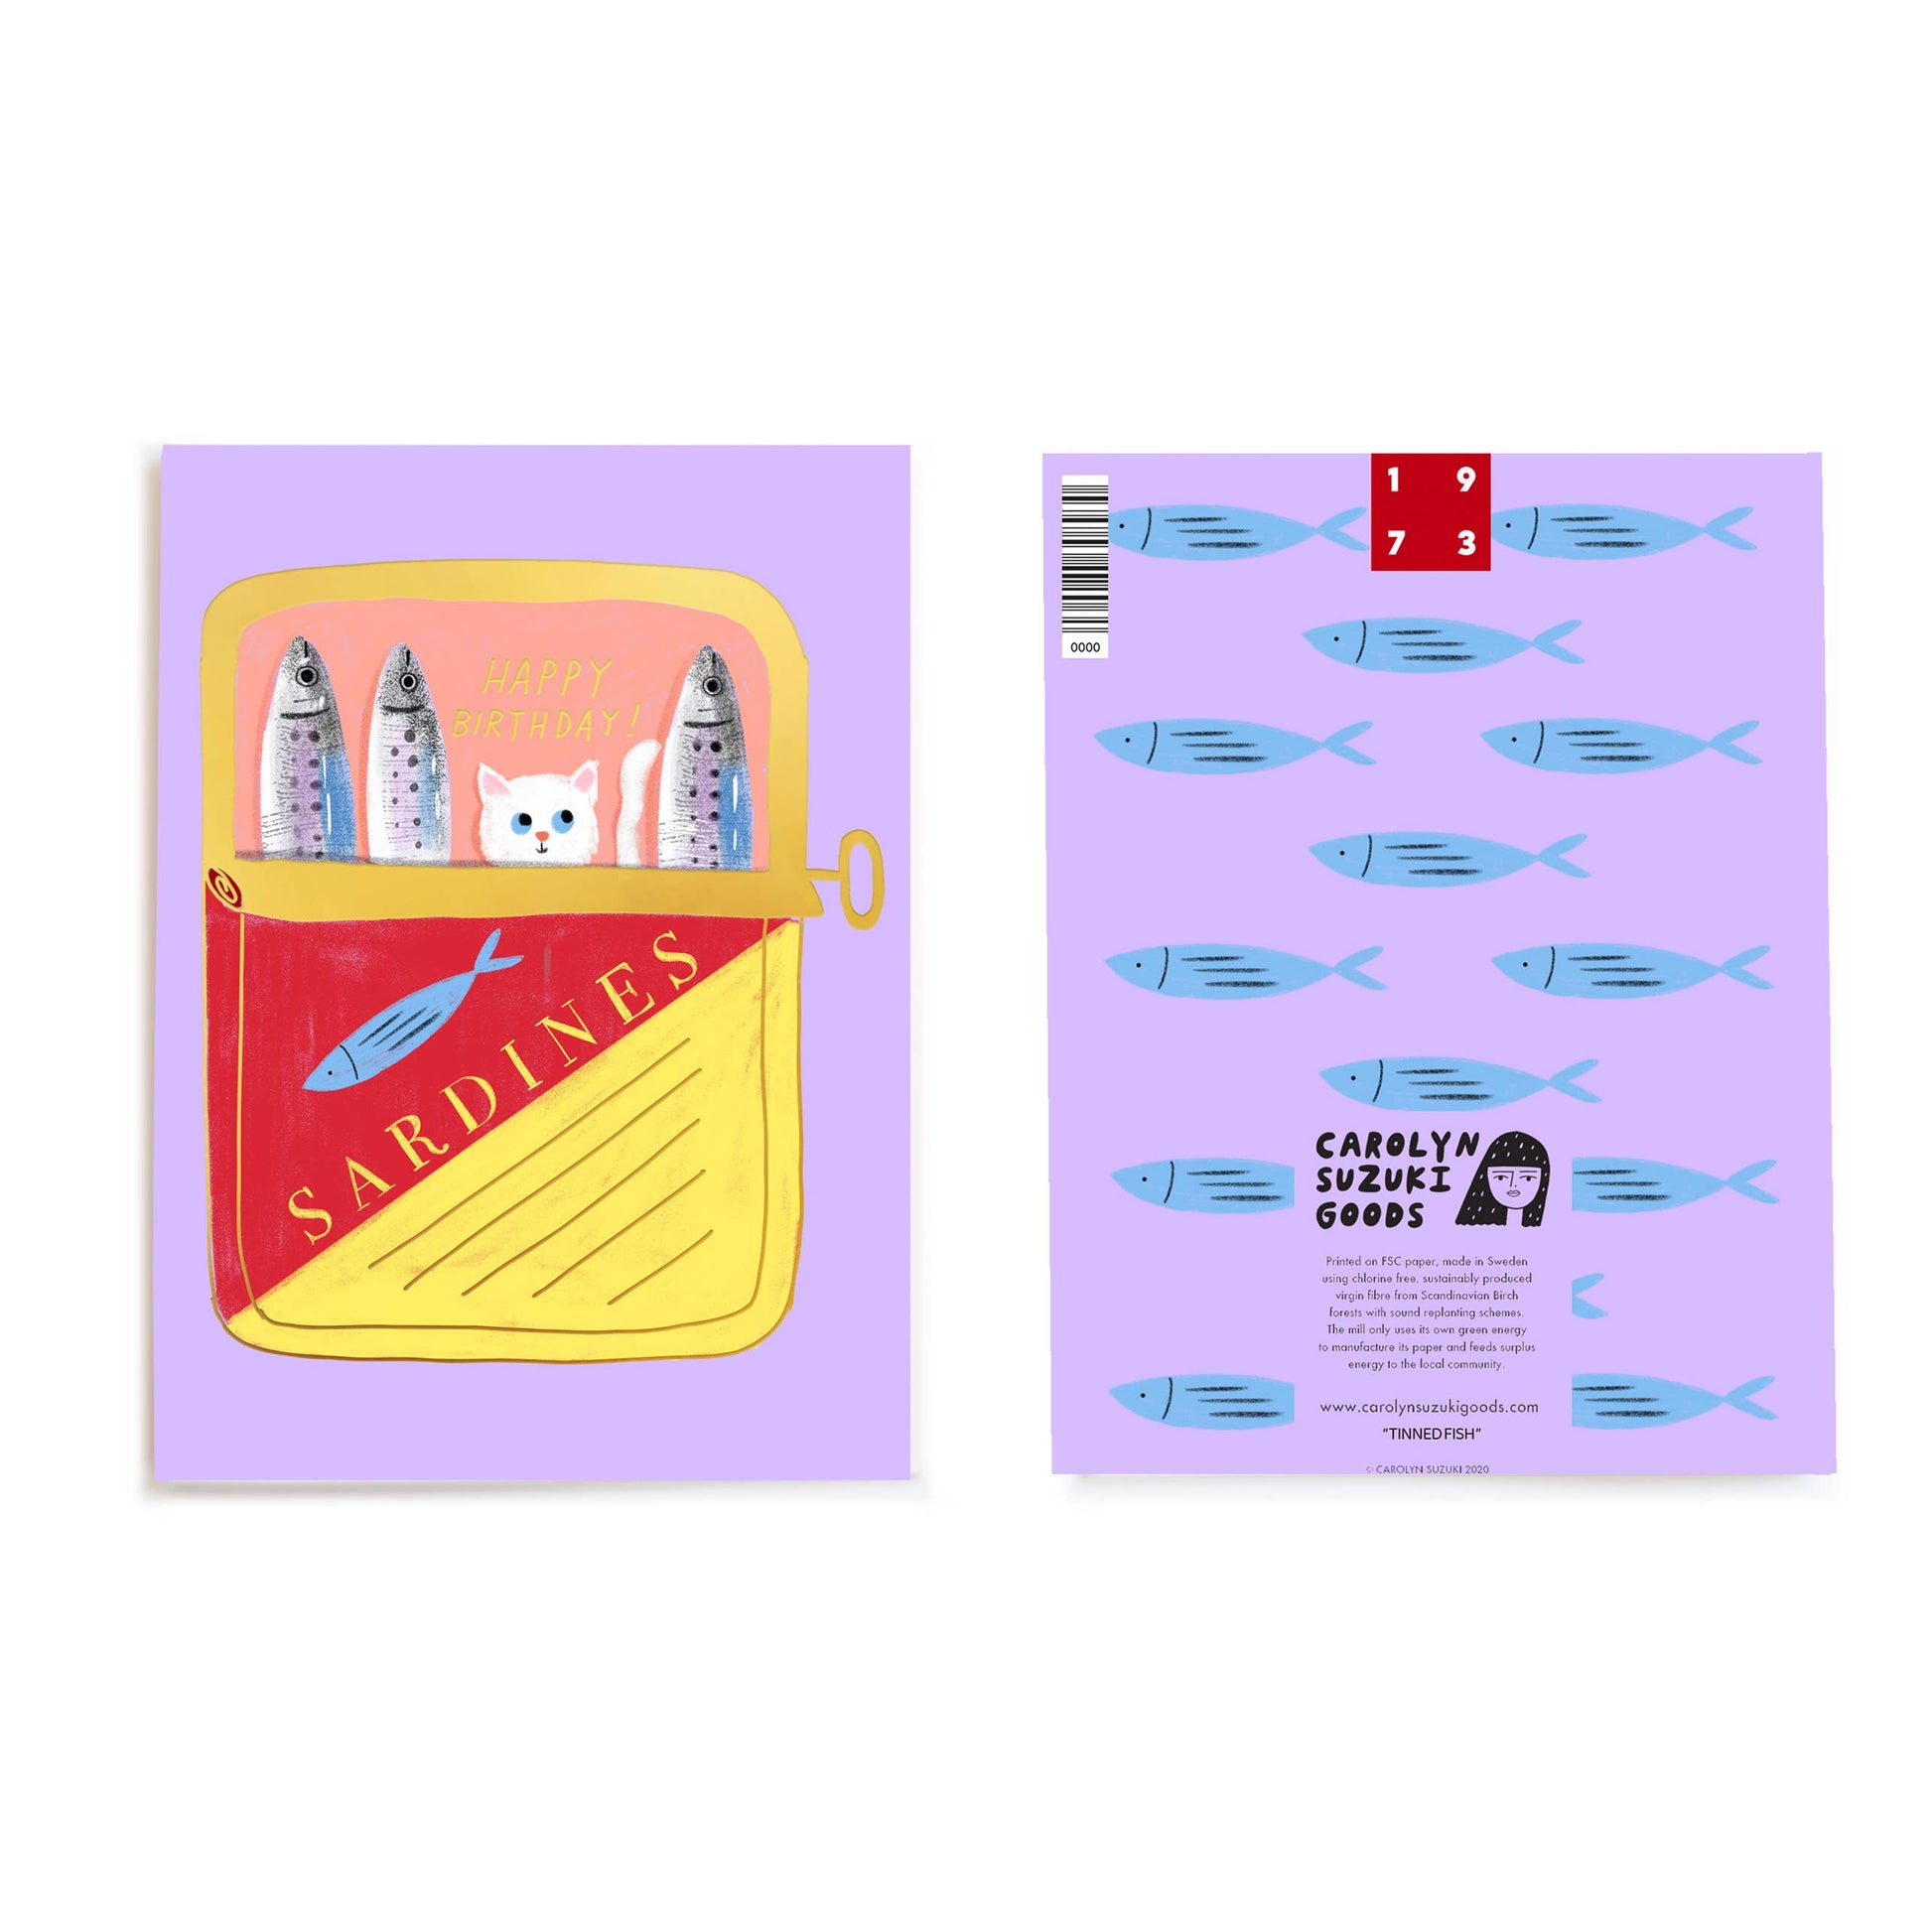 Imagery showing both fron and back designs of tinned fish birthday card 